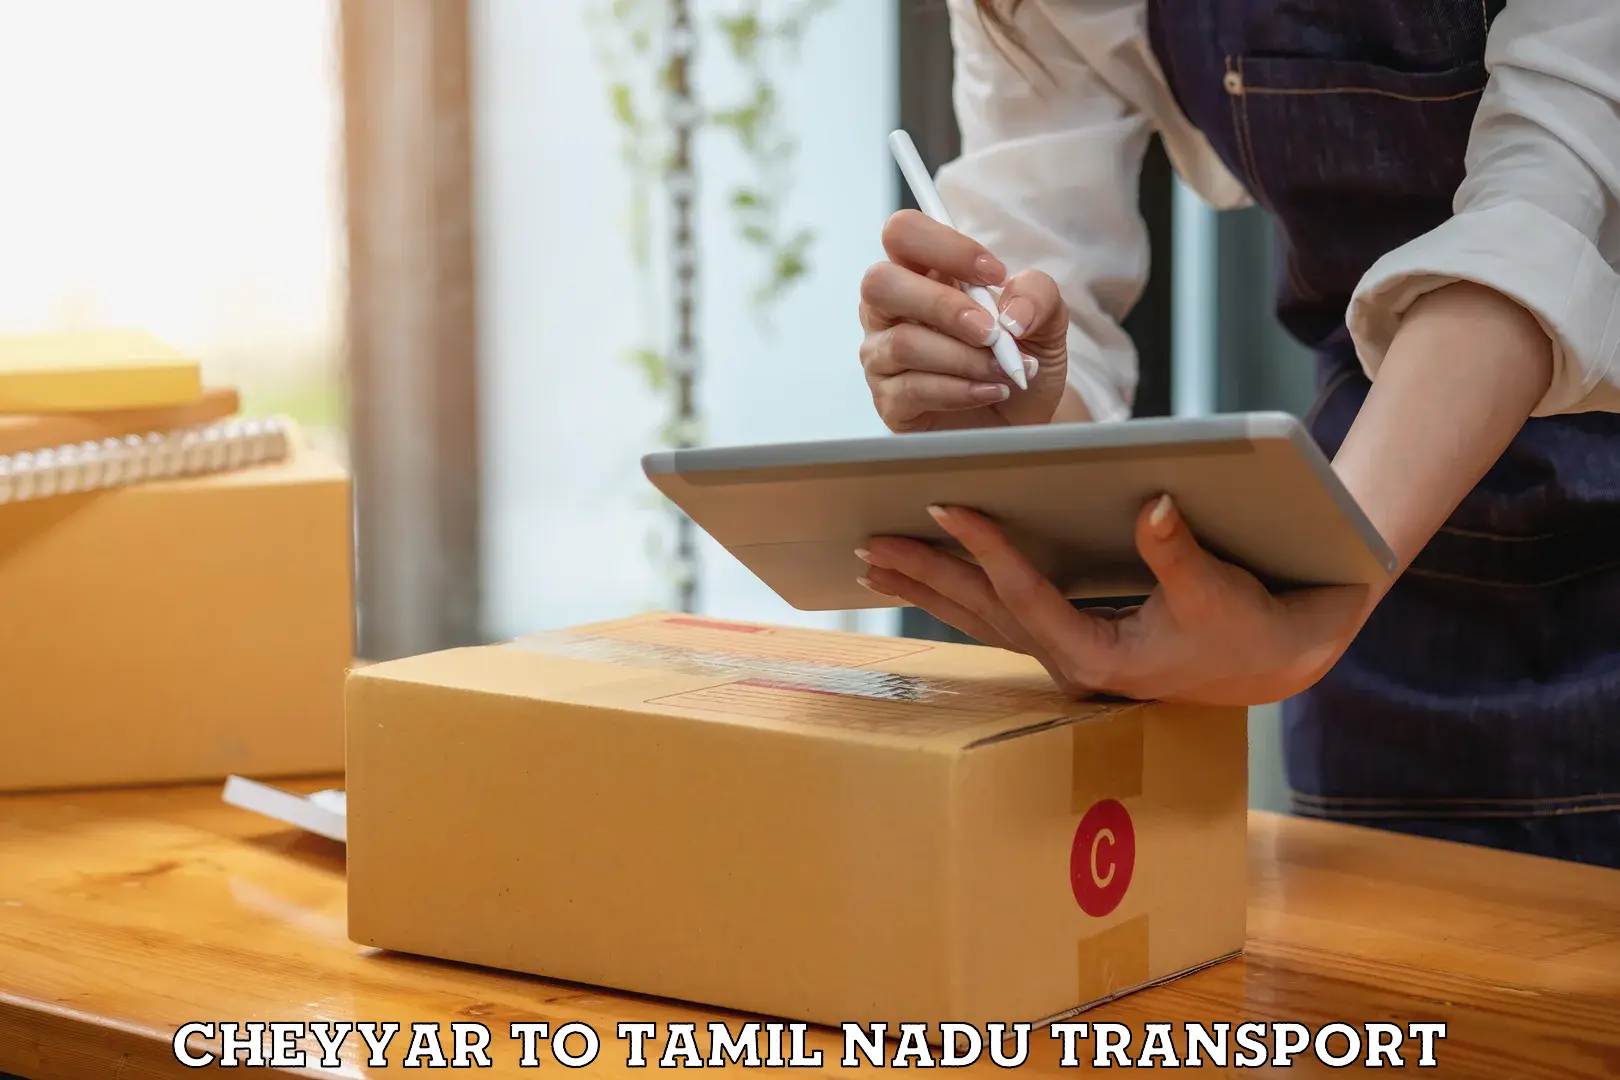 Transport bike from one state to another Cheyyar to Tamil Nadu